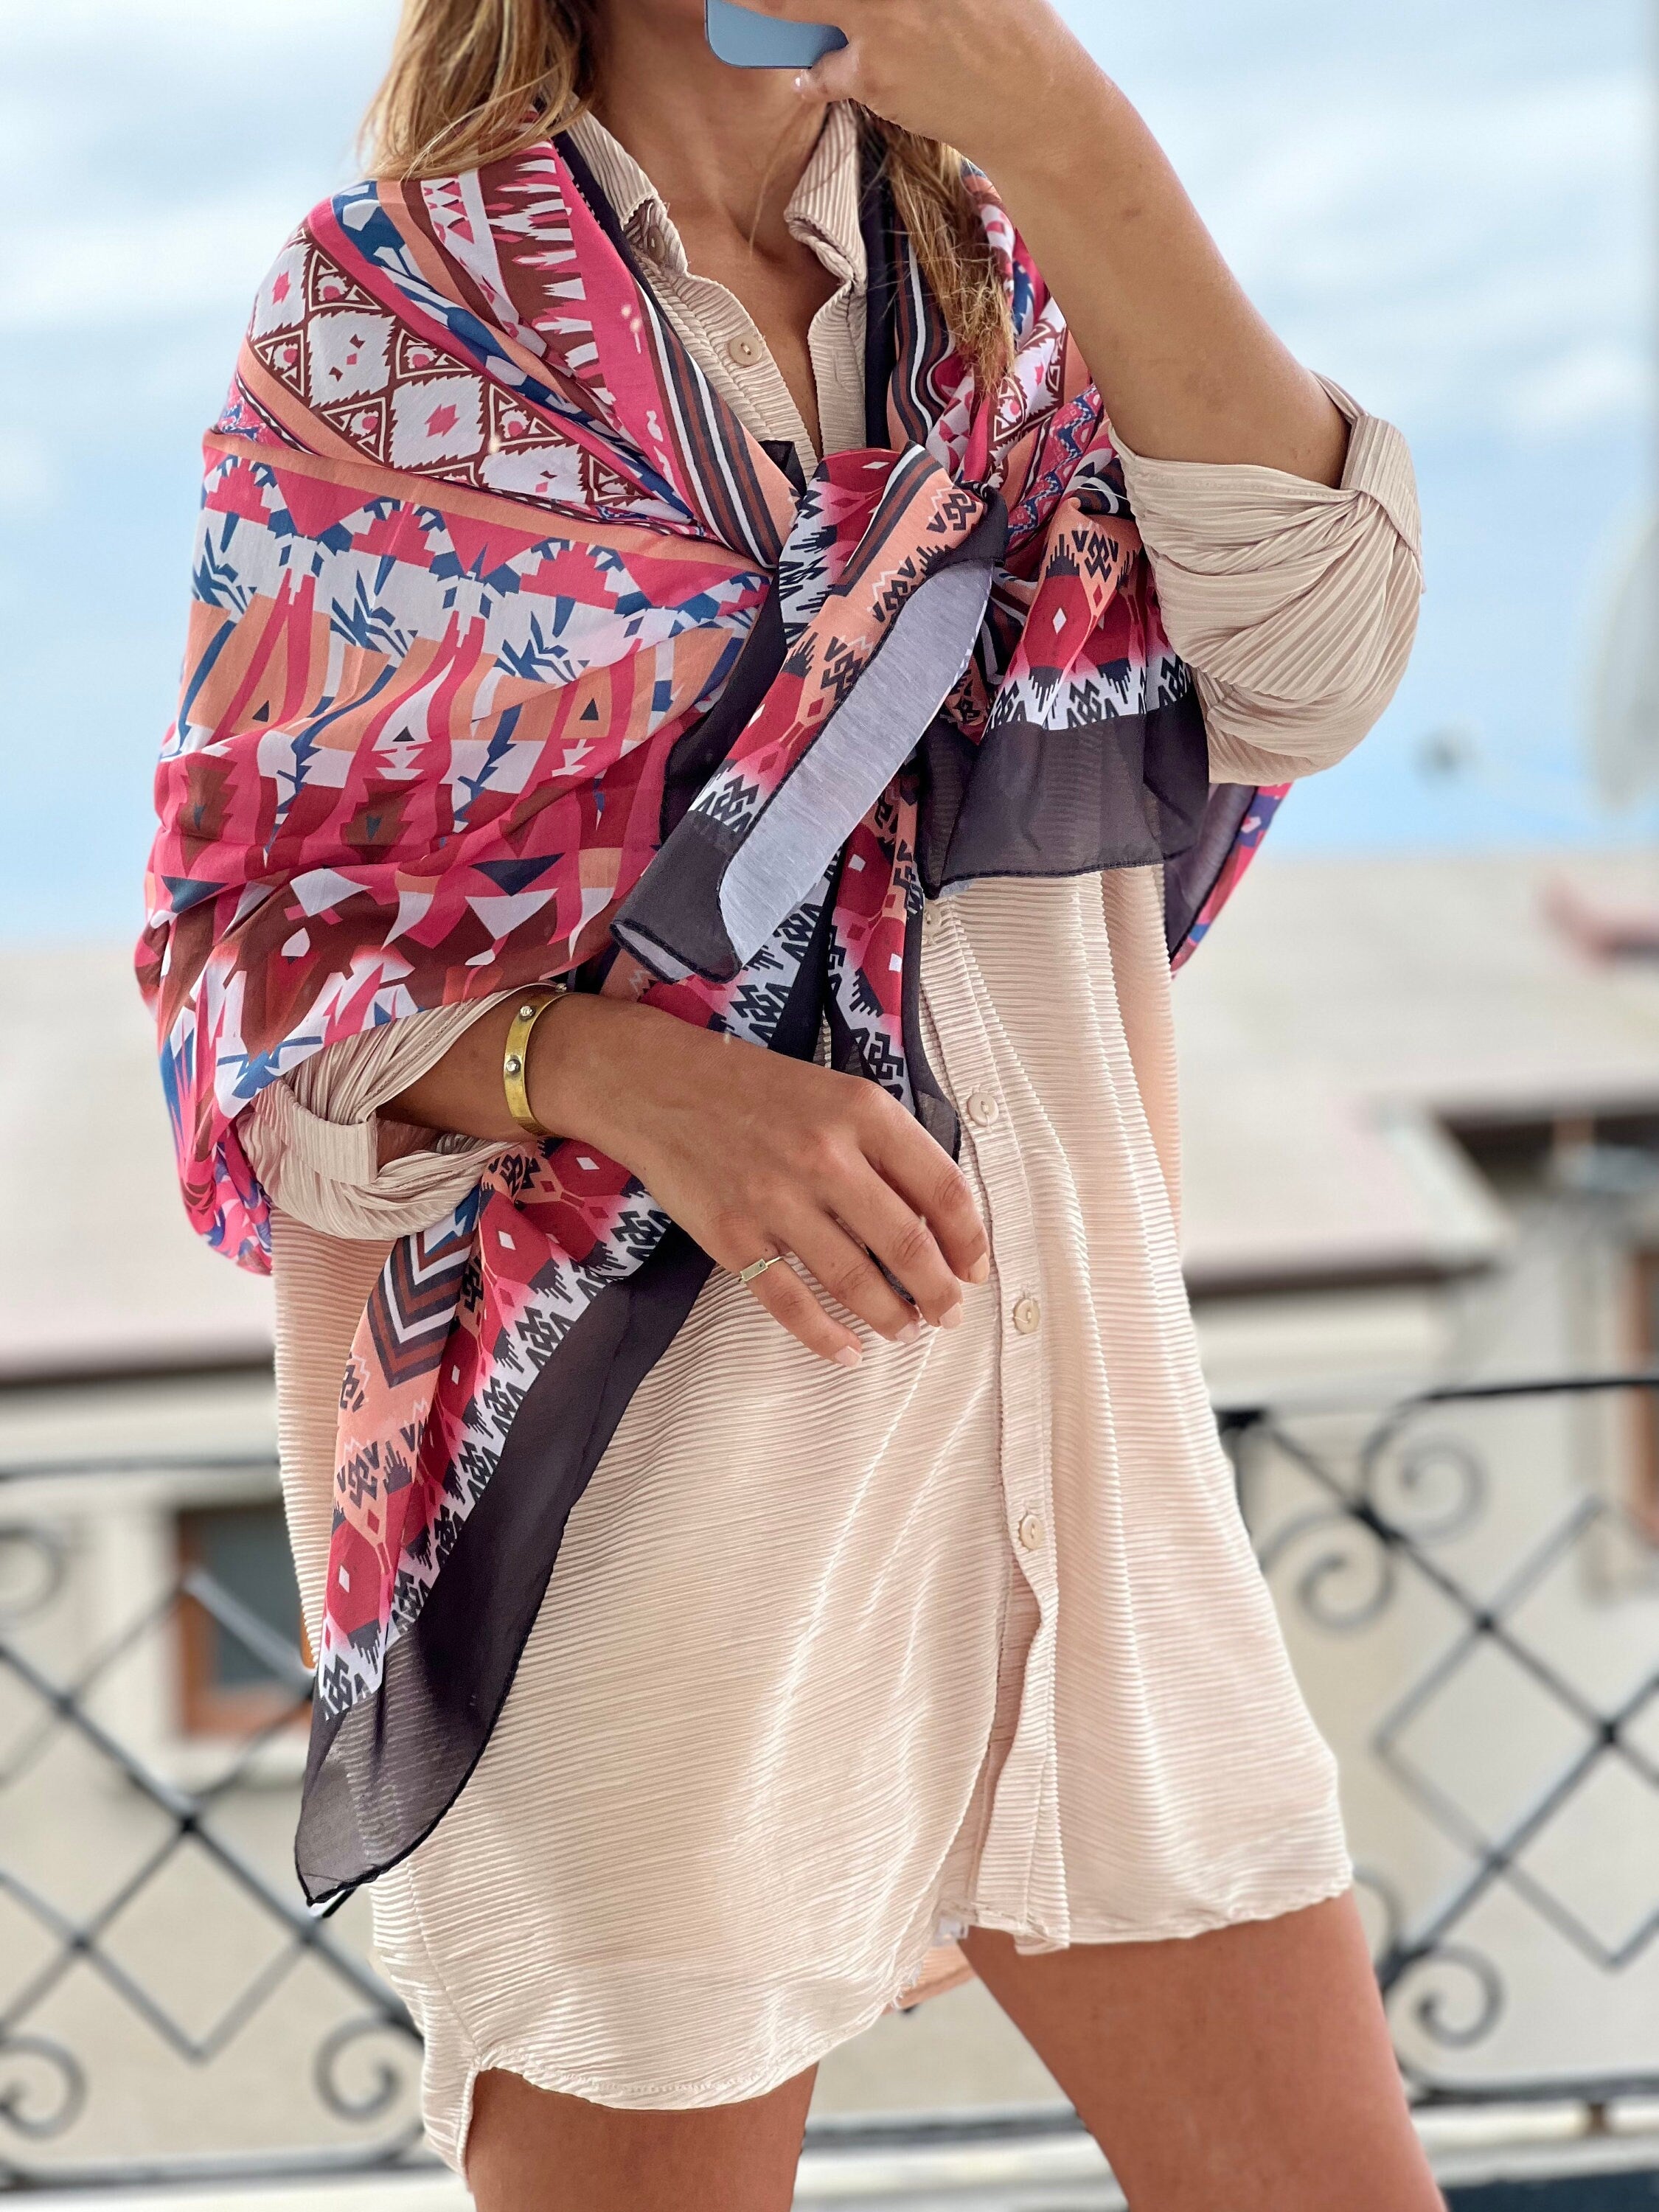 Stay cozy and fashionable with this Large Cotton-Viscose blend voile scarf in a bold pink, green, and black color scheme. Ideal for all seasons, this scarf features a unique and authentic pattern that adds a touch of sophistication to any outfit.